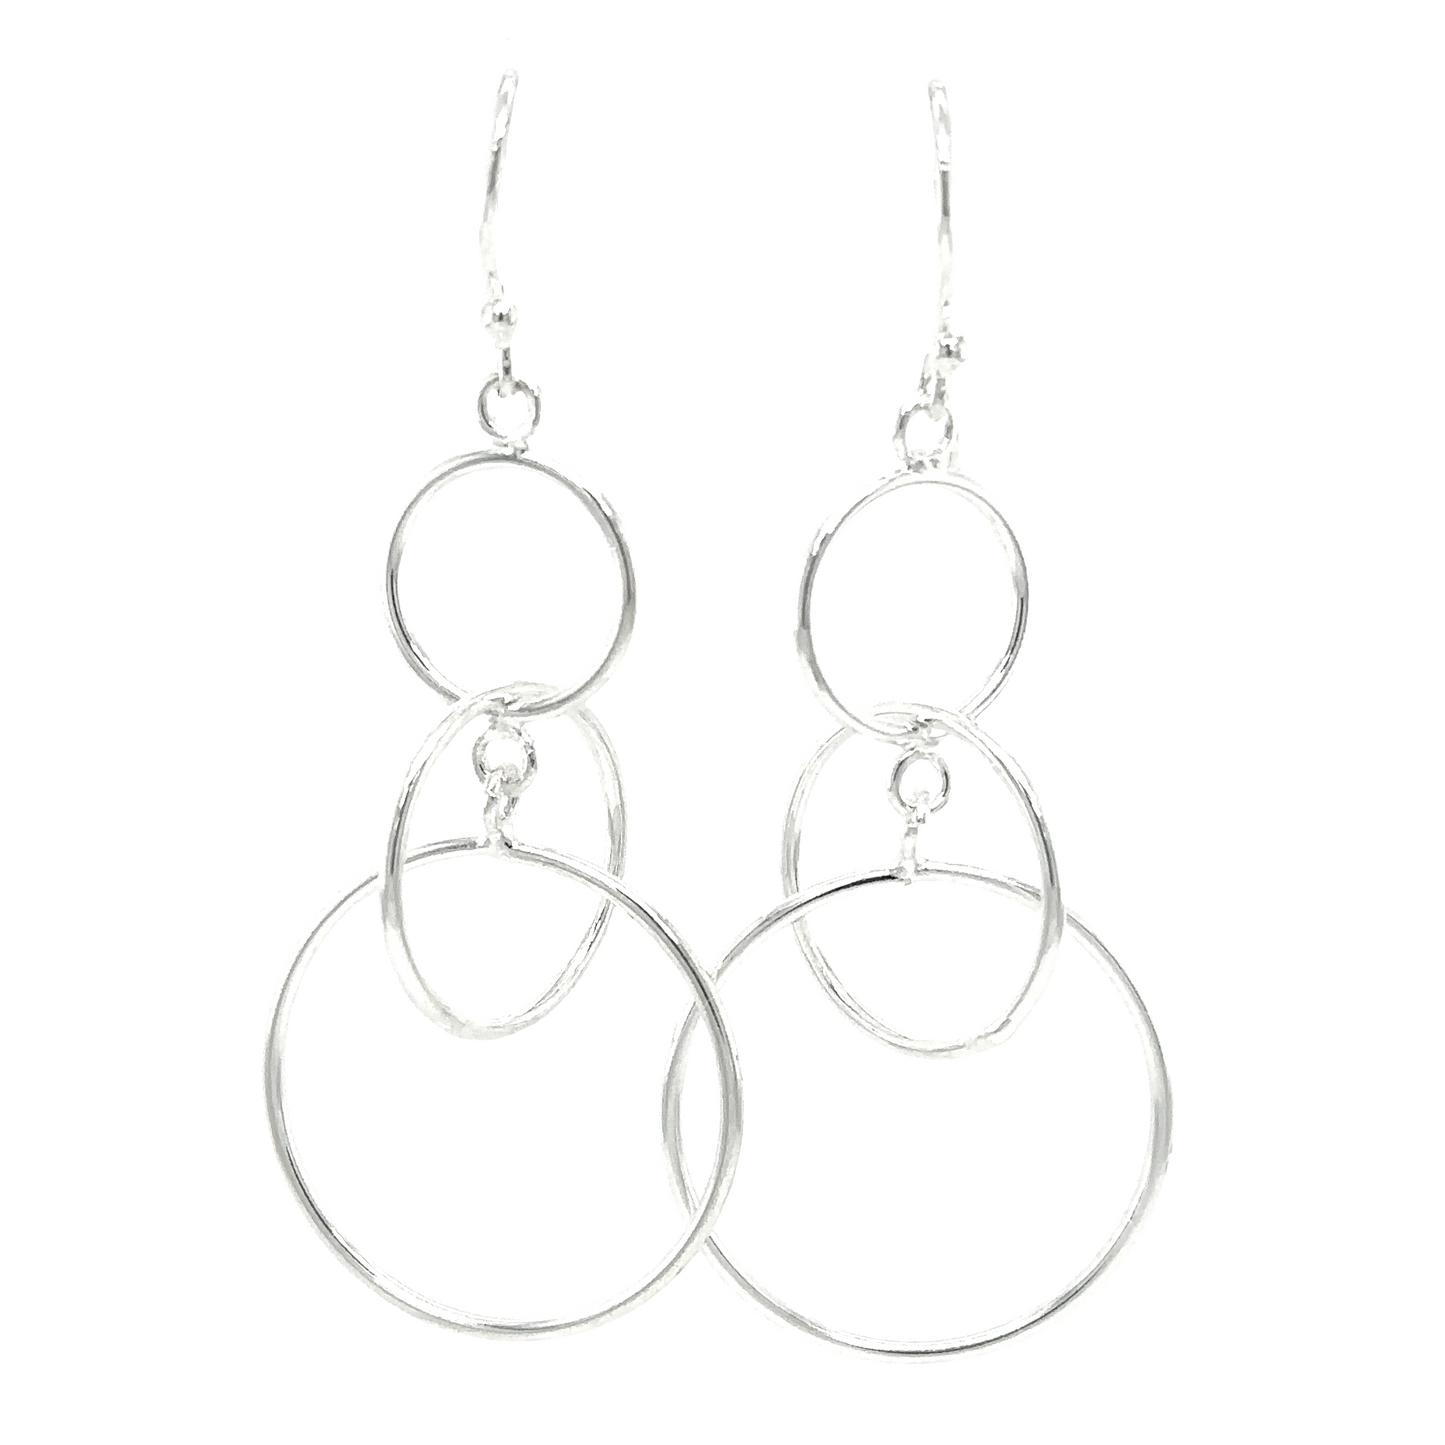 A pair of Super Silver Interlocked Circles Earrings on a white background.